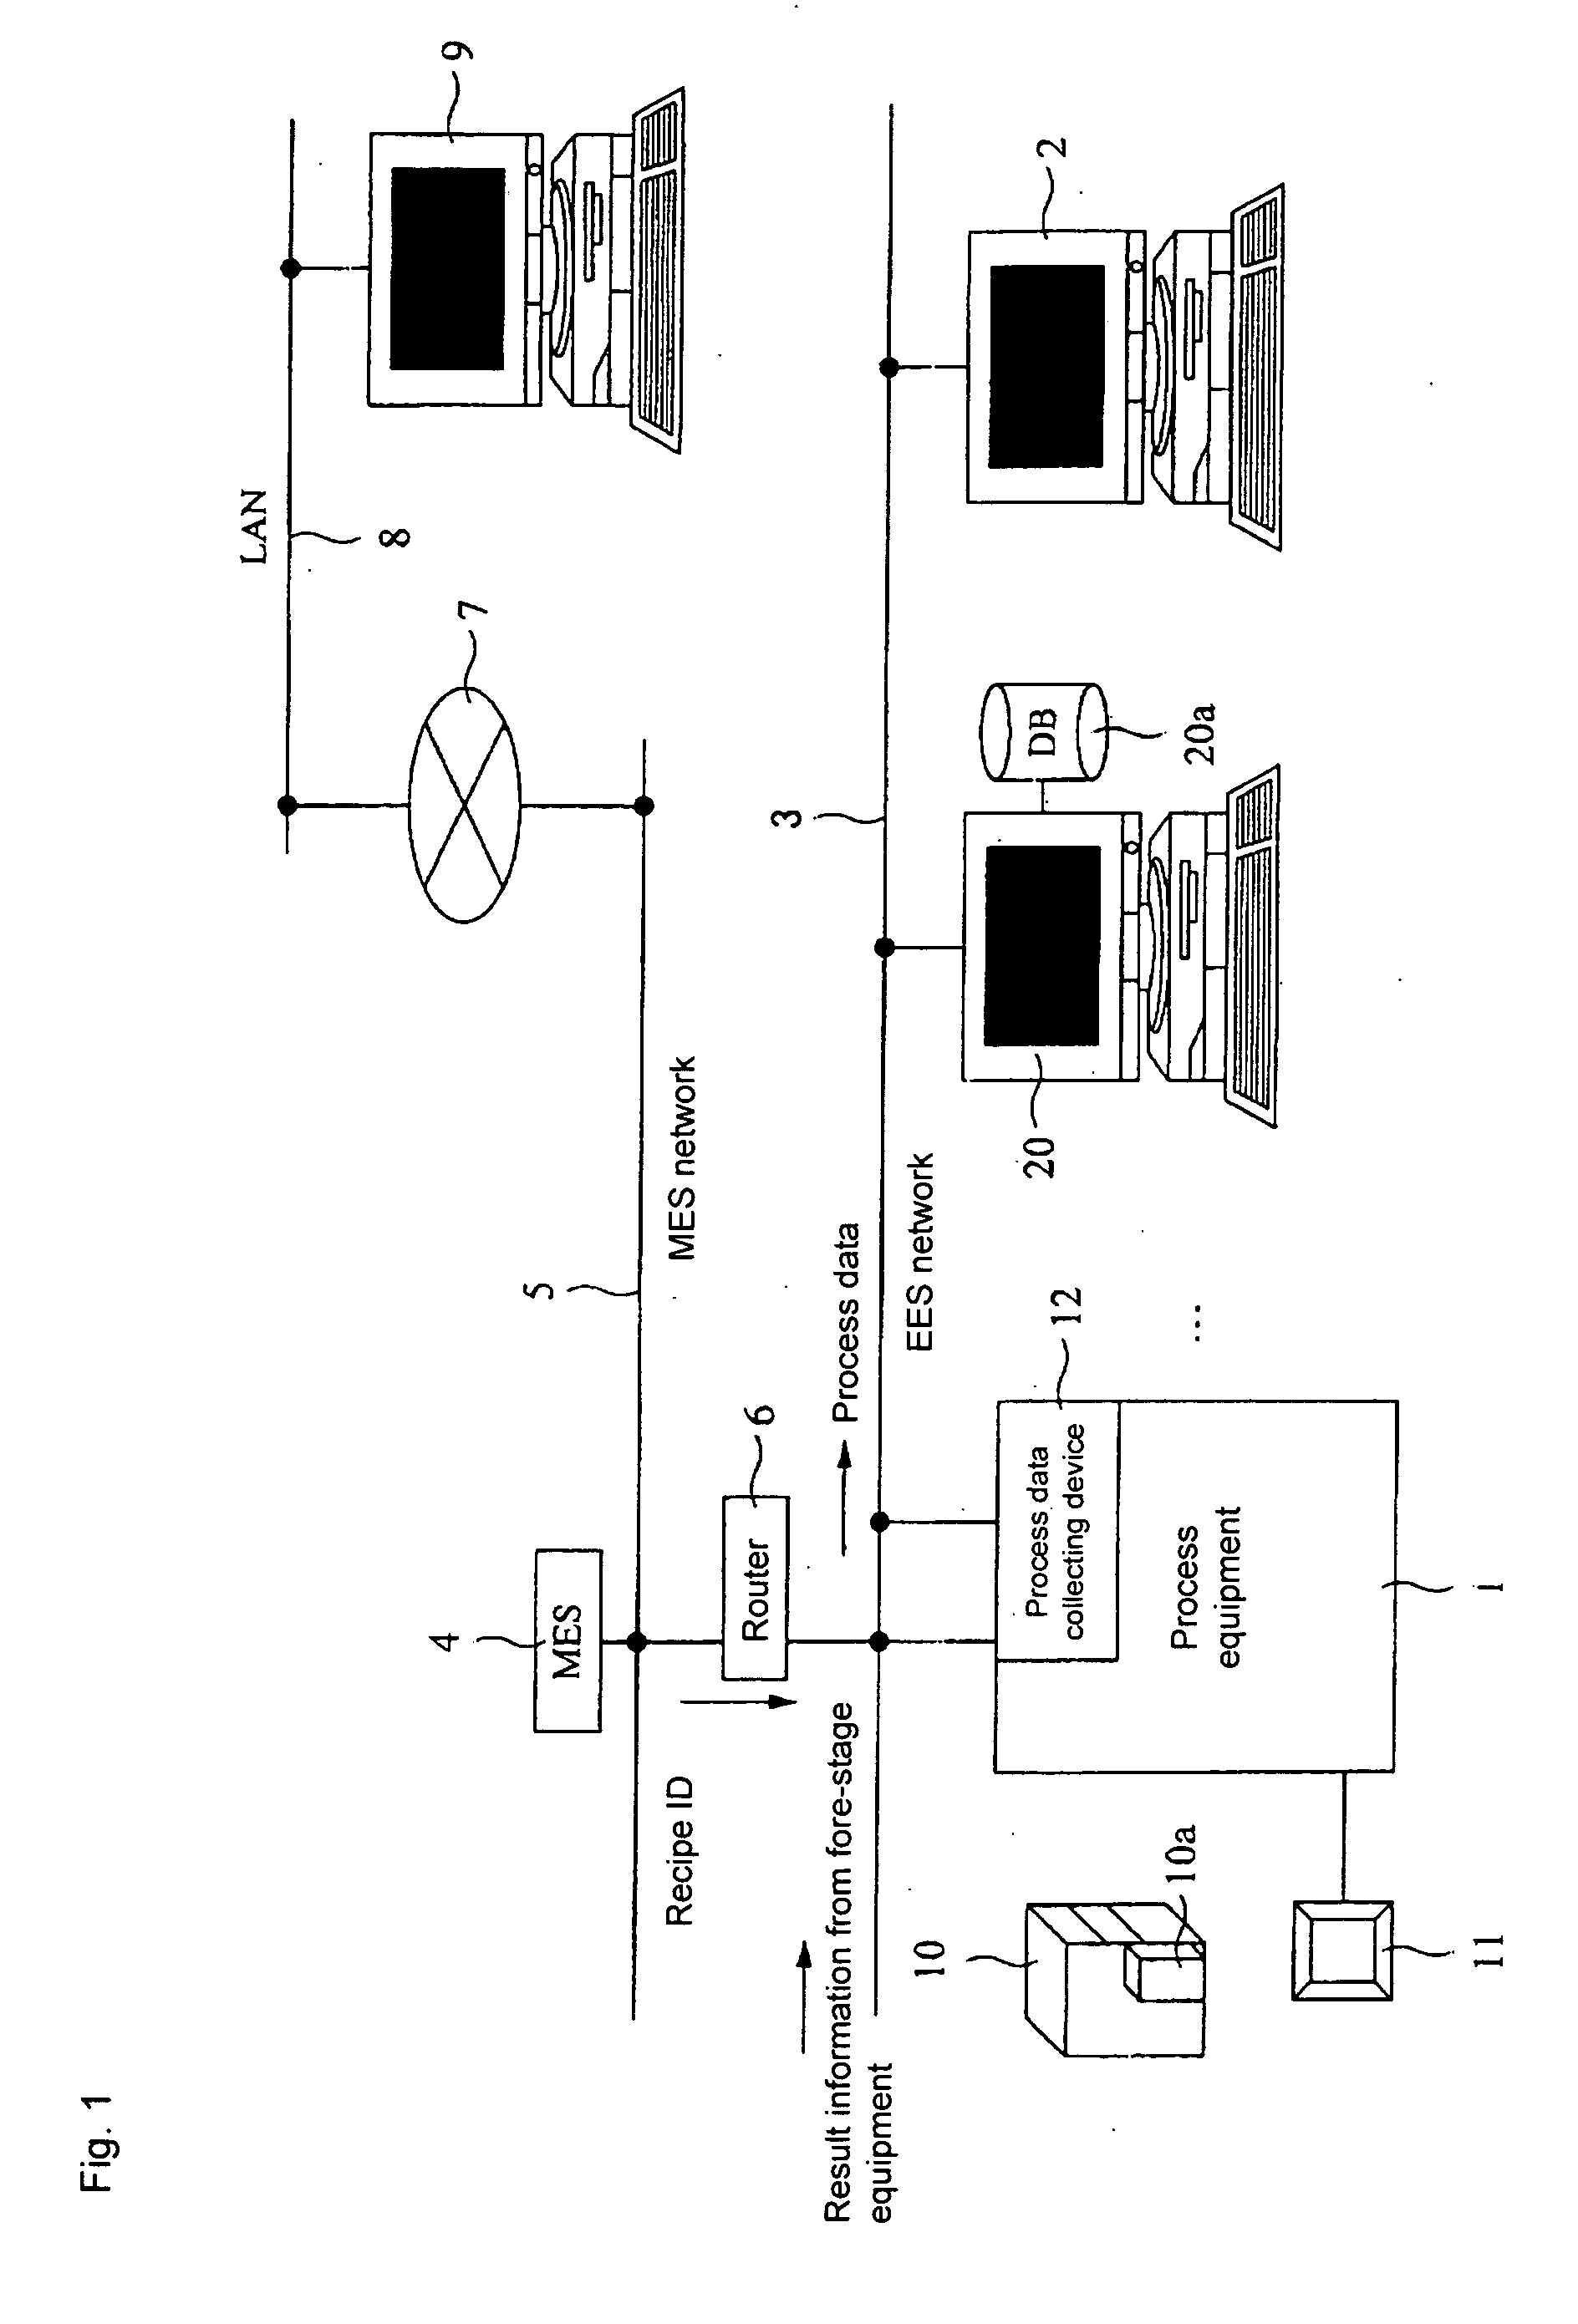 Apparatus and program for process fault analysis